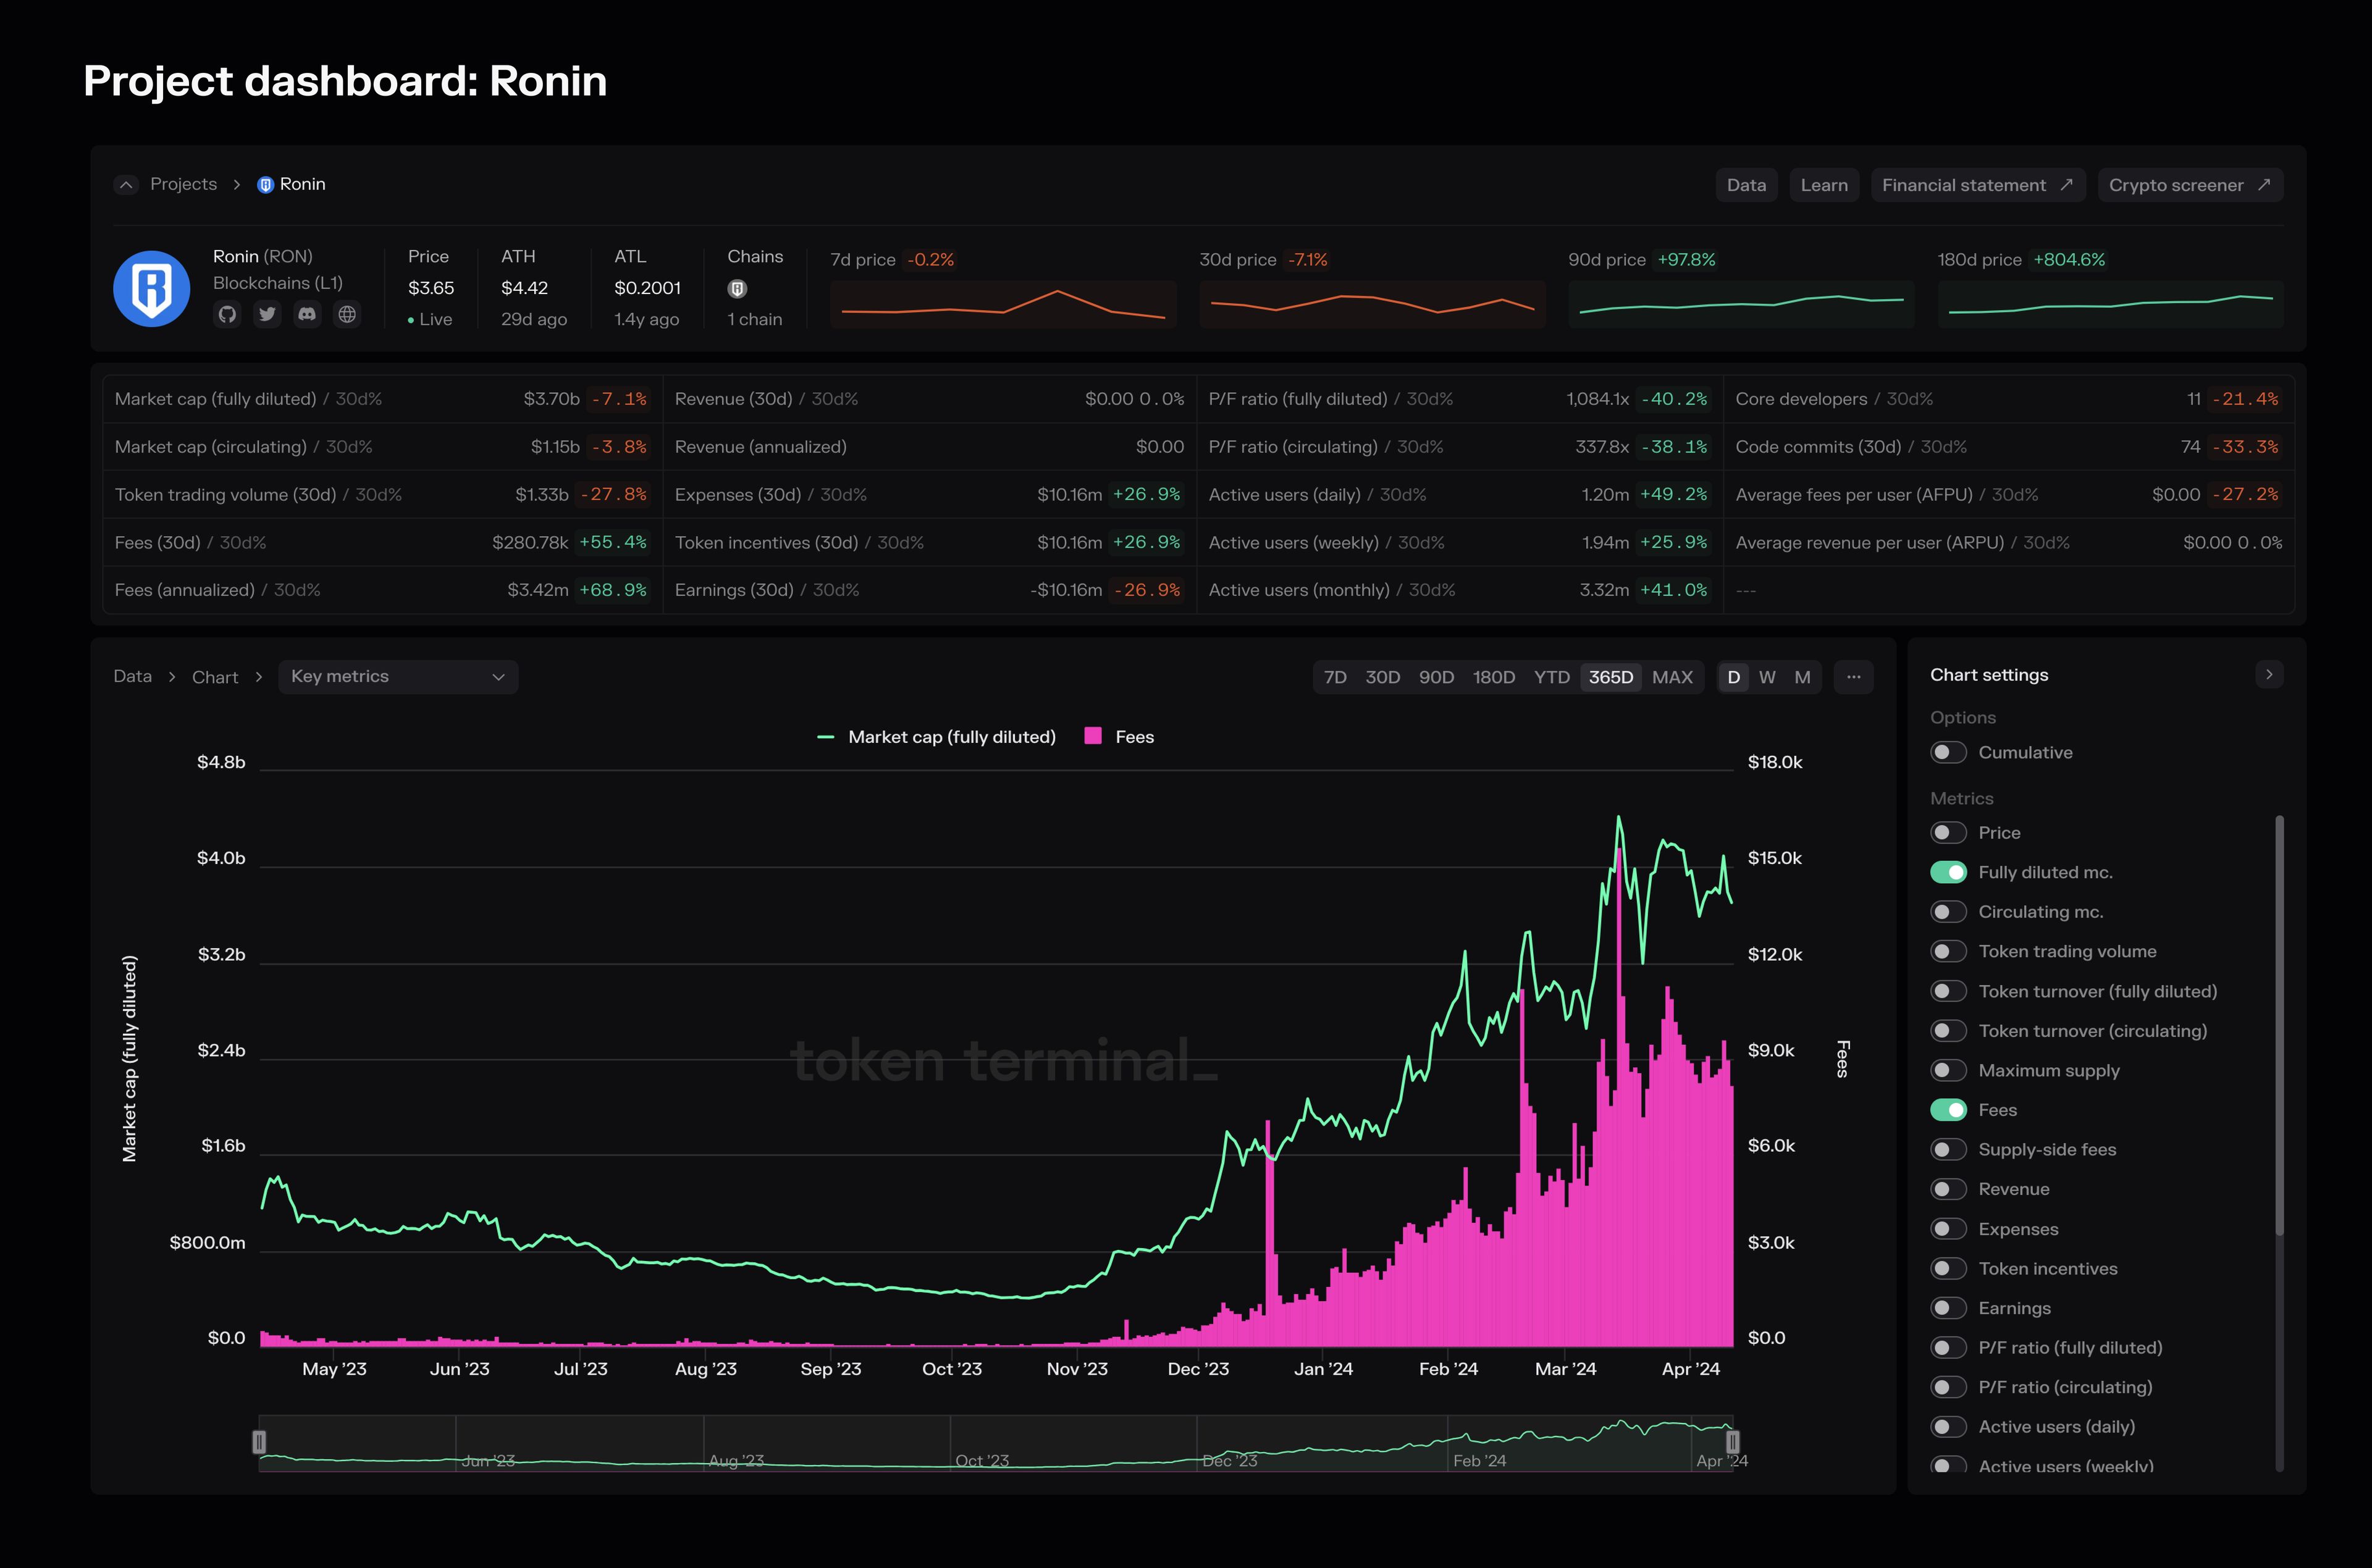 An overview of the Ronin project dashboard.